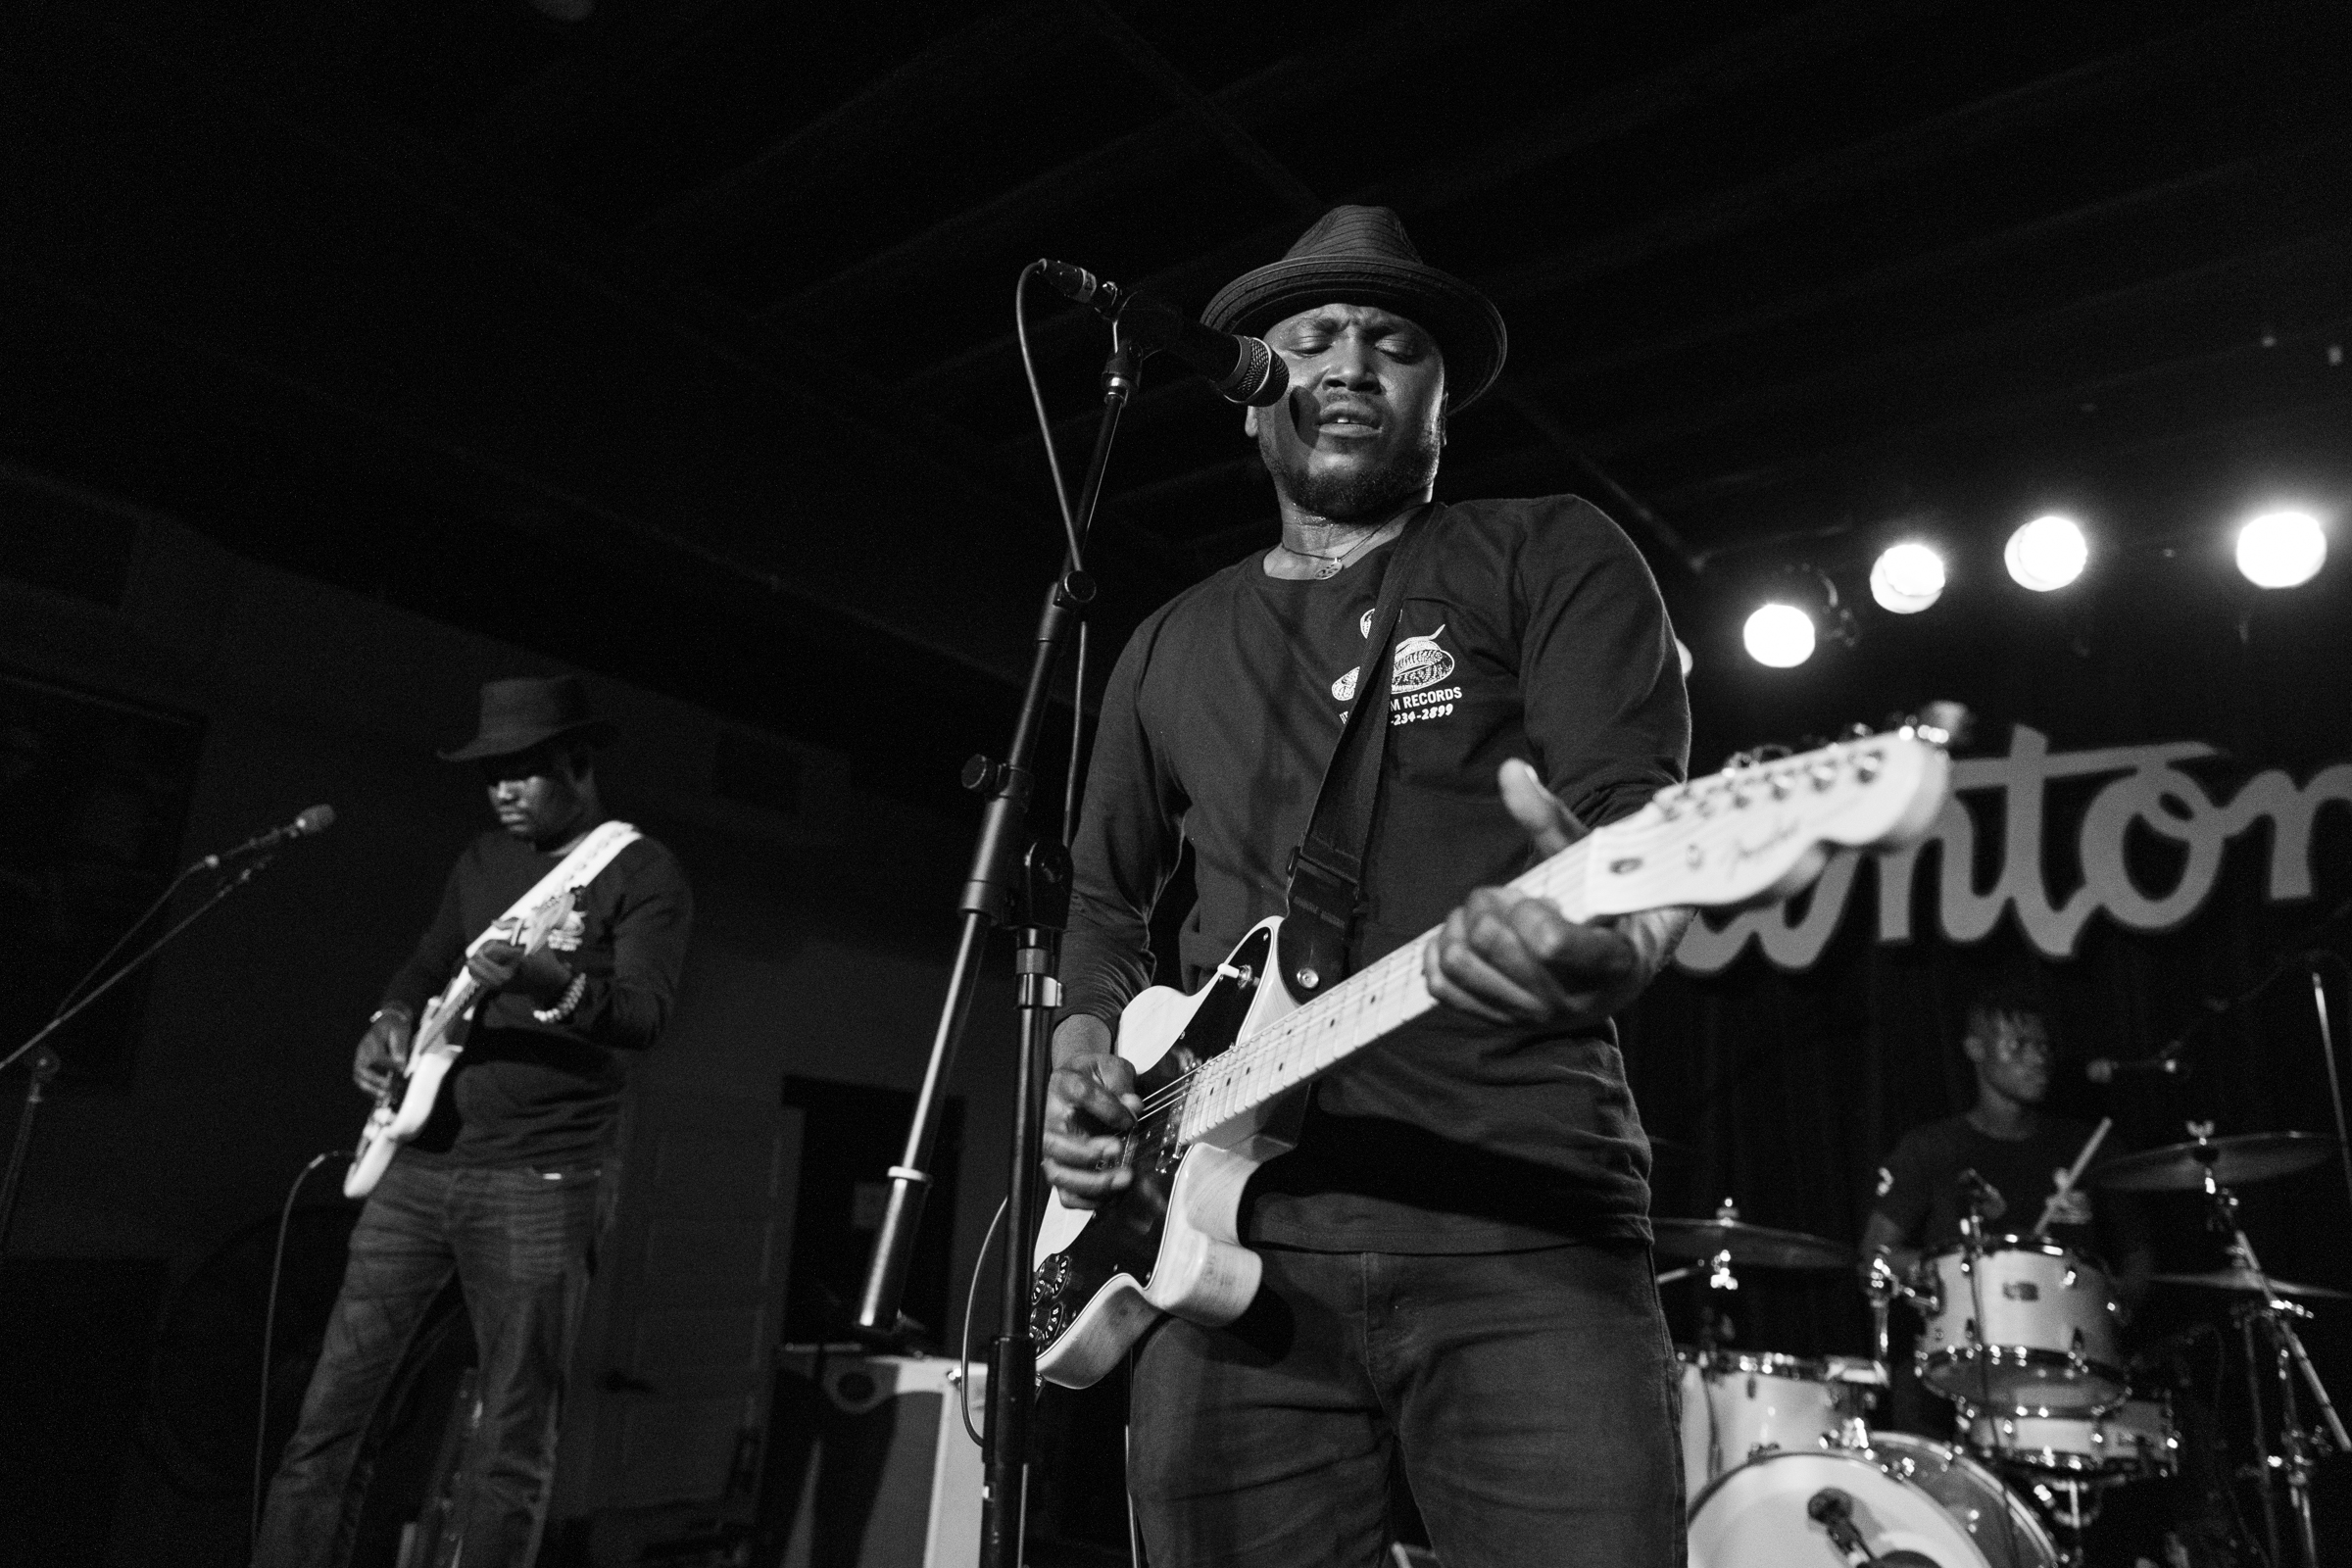 Songhoy Blues at Antone's